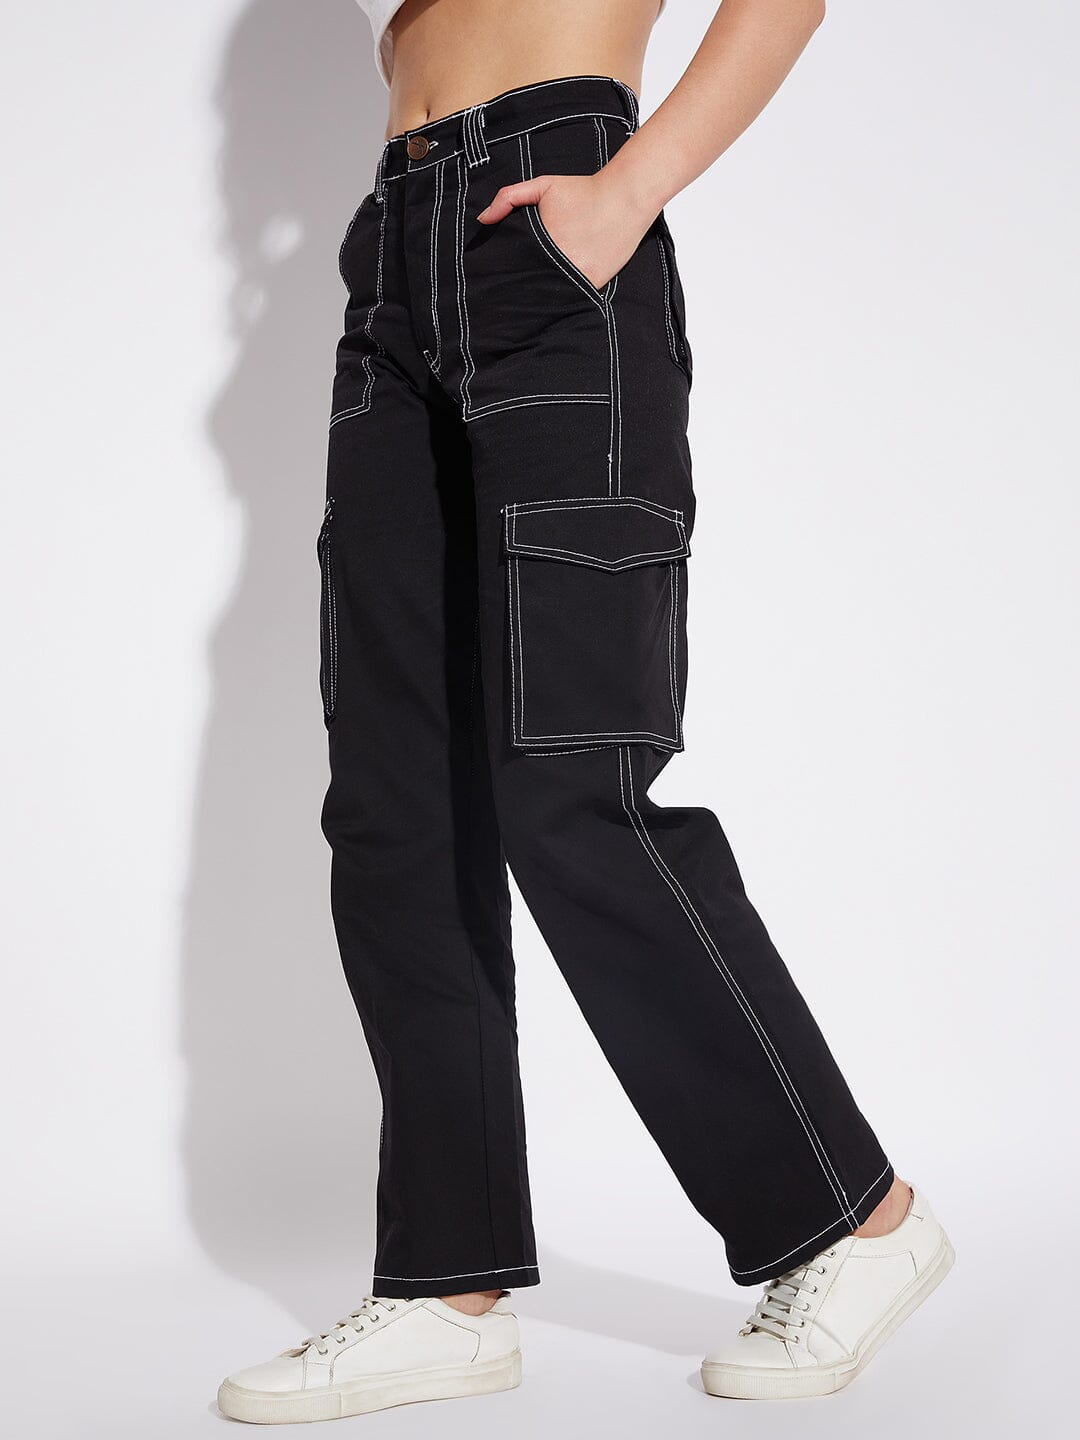 Trendy Cargo Pant For Girls  Women Loose Chain Trousers  Pants